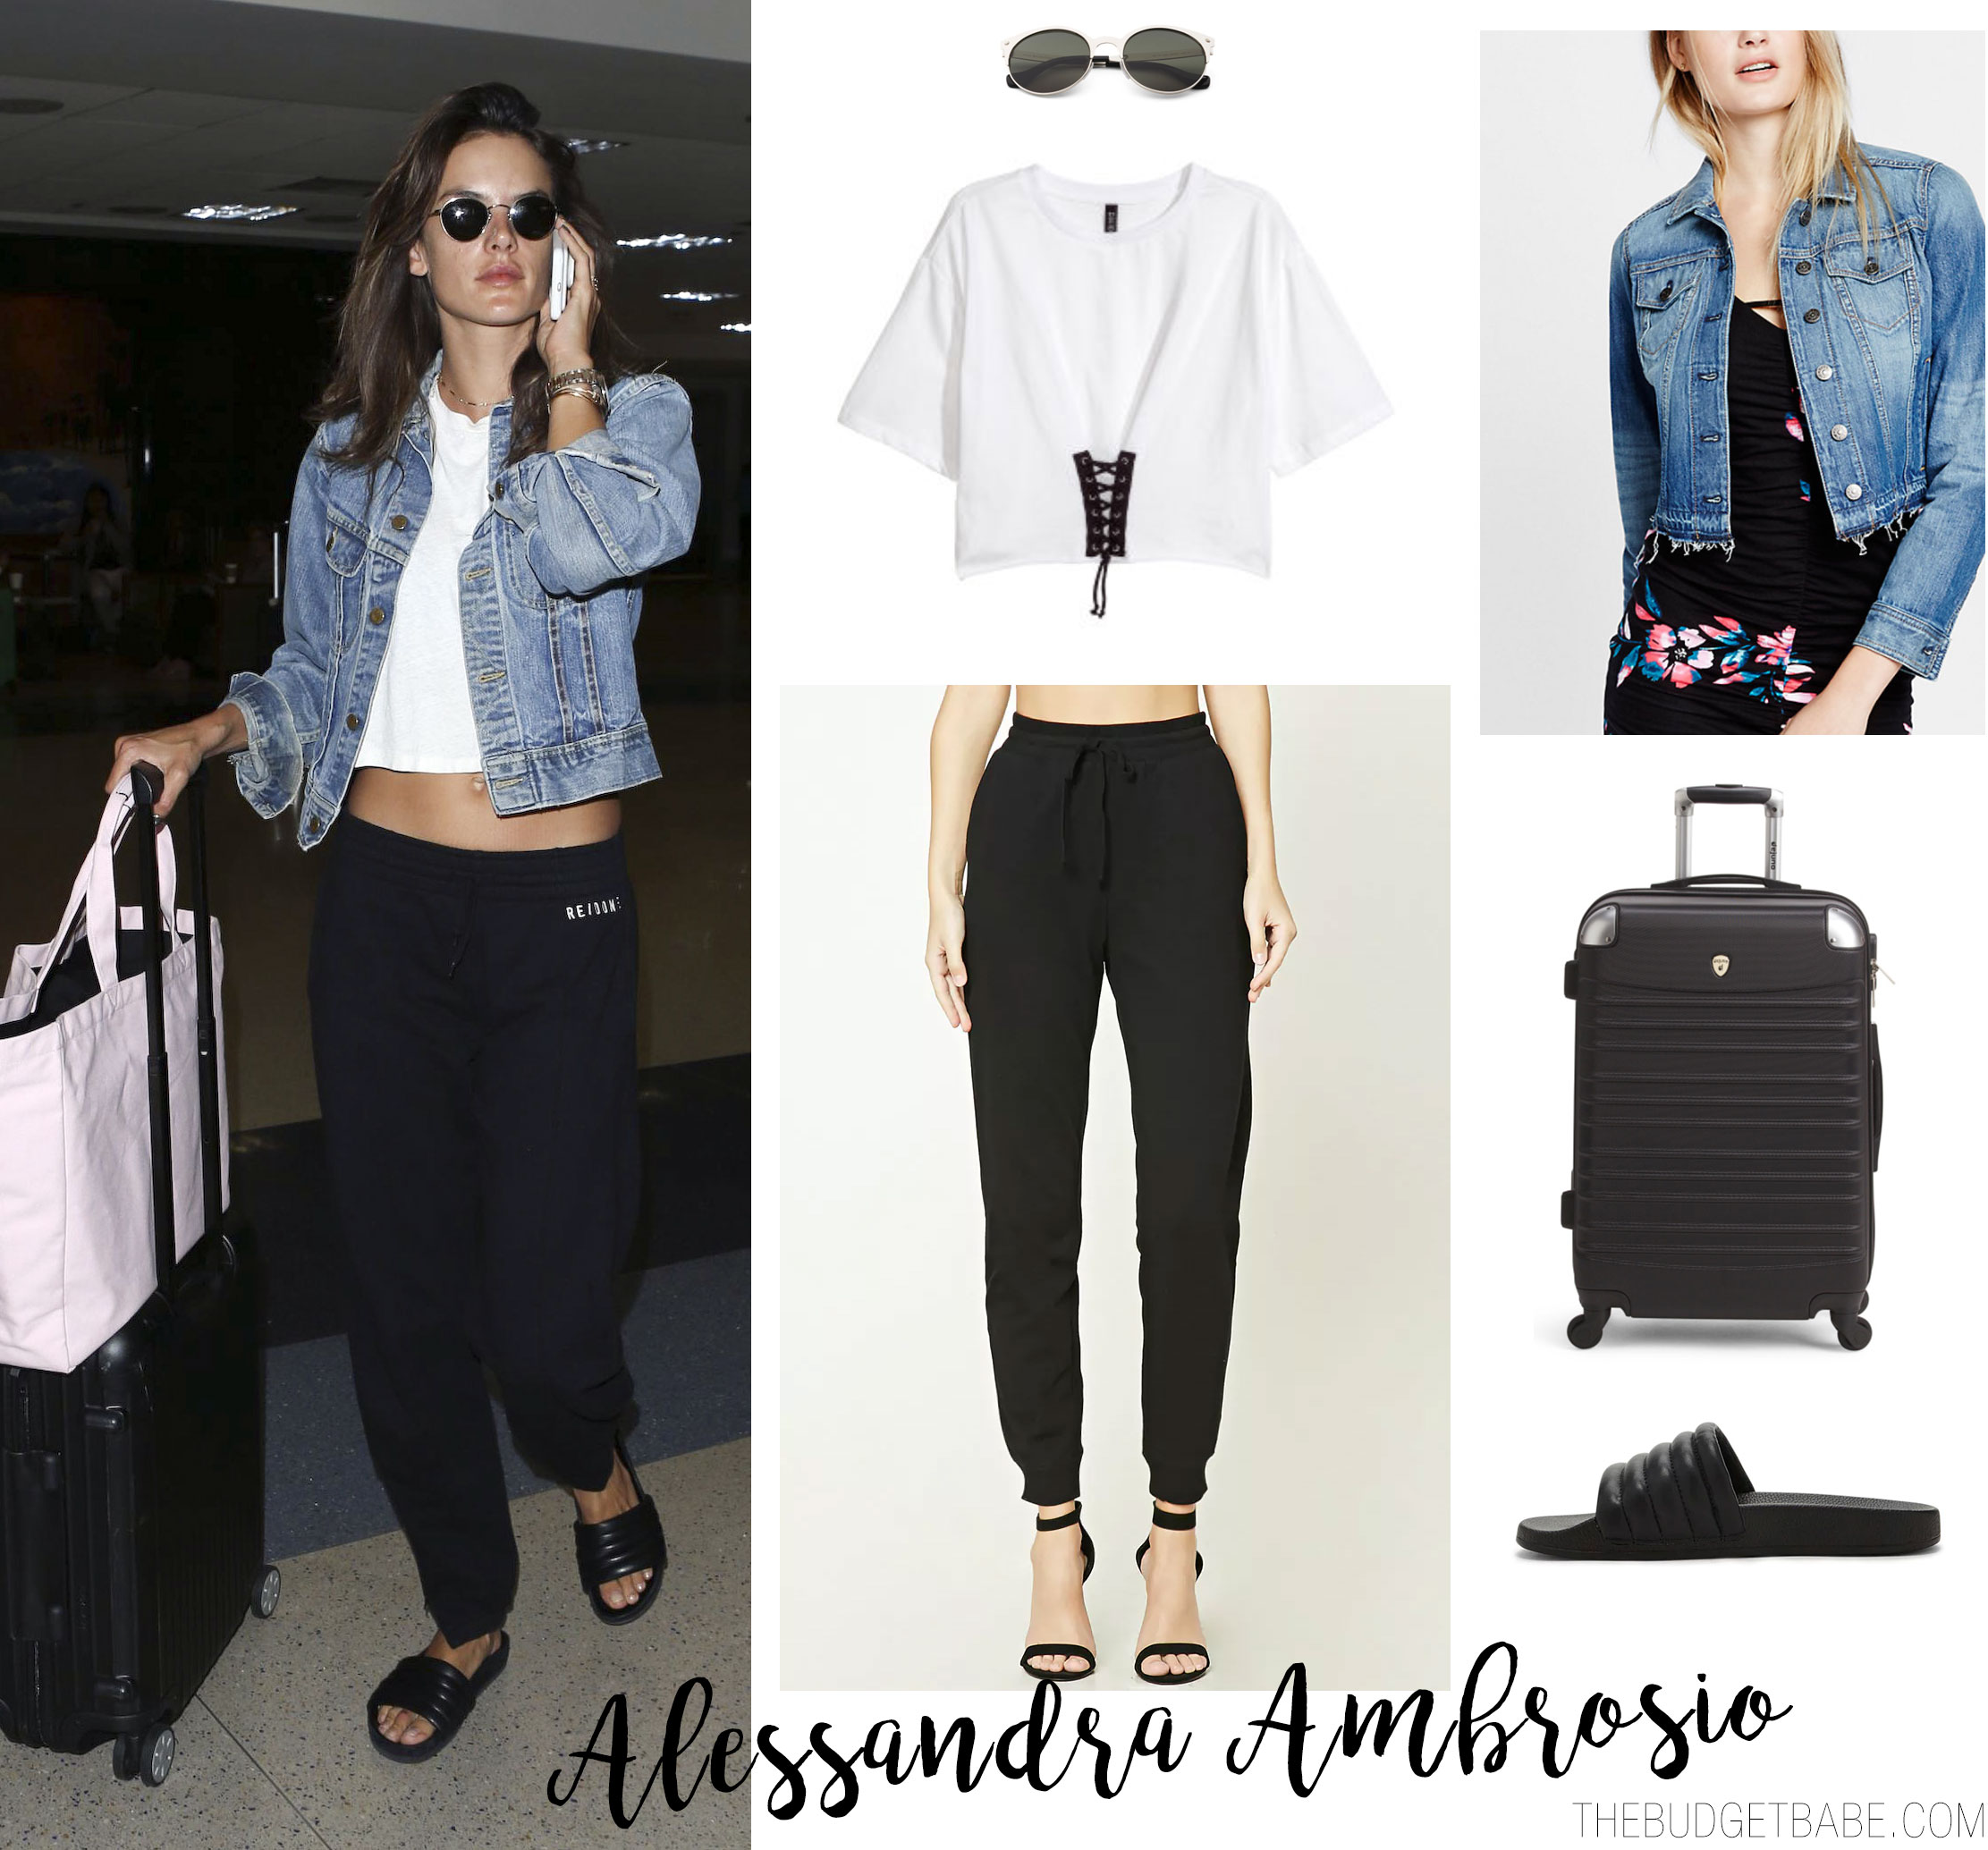 Alessandra Ambrosio wears a denim jacket, Re/Done sweatpants and Isabel Marant quilted slide sandals.